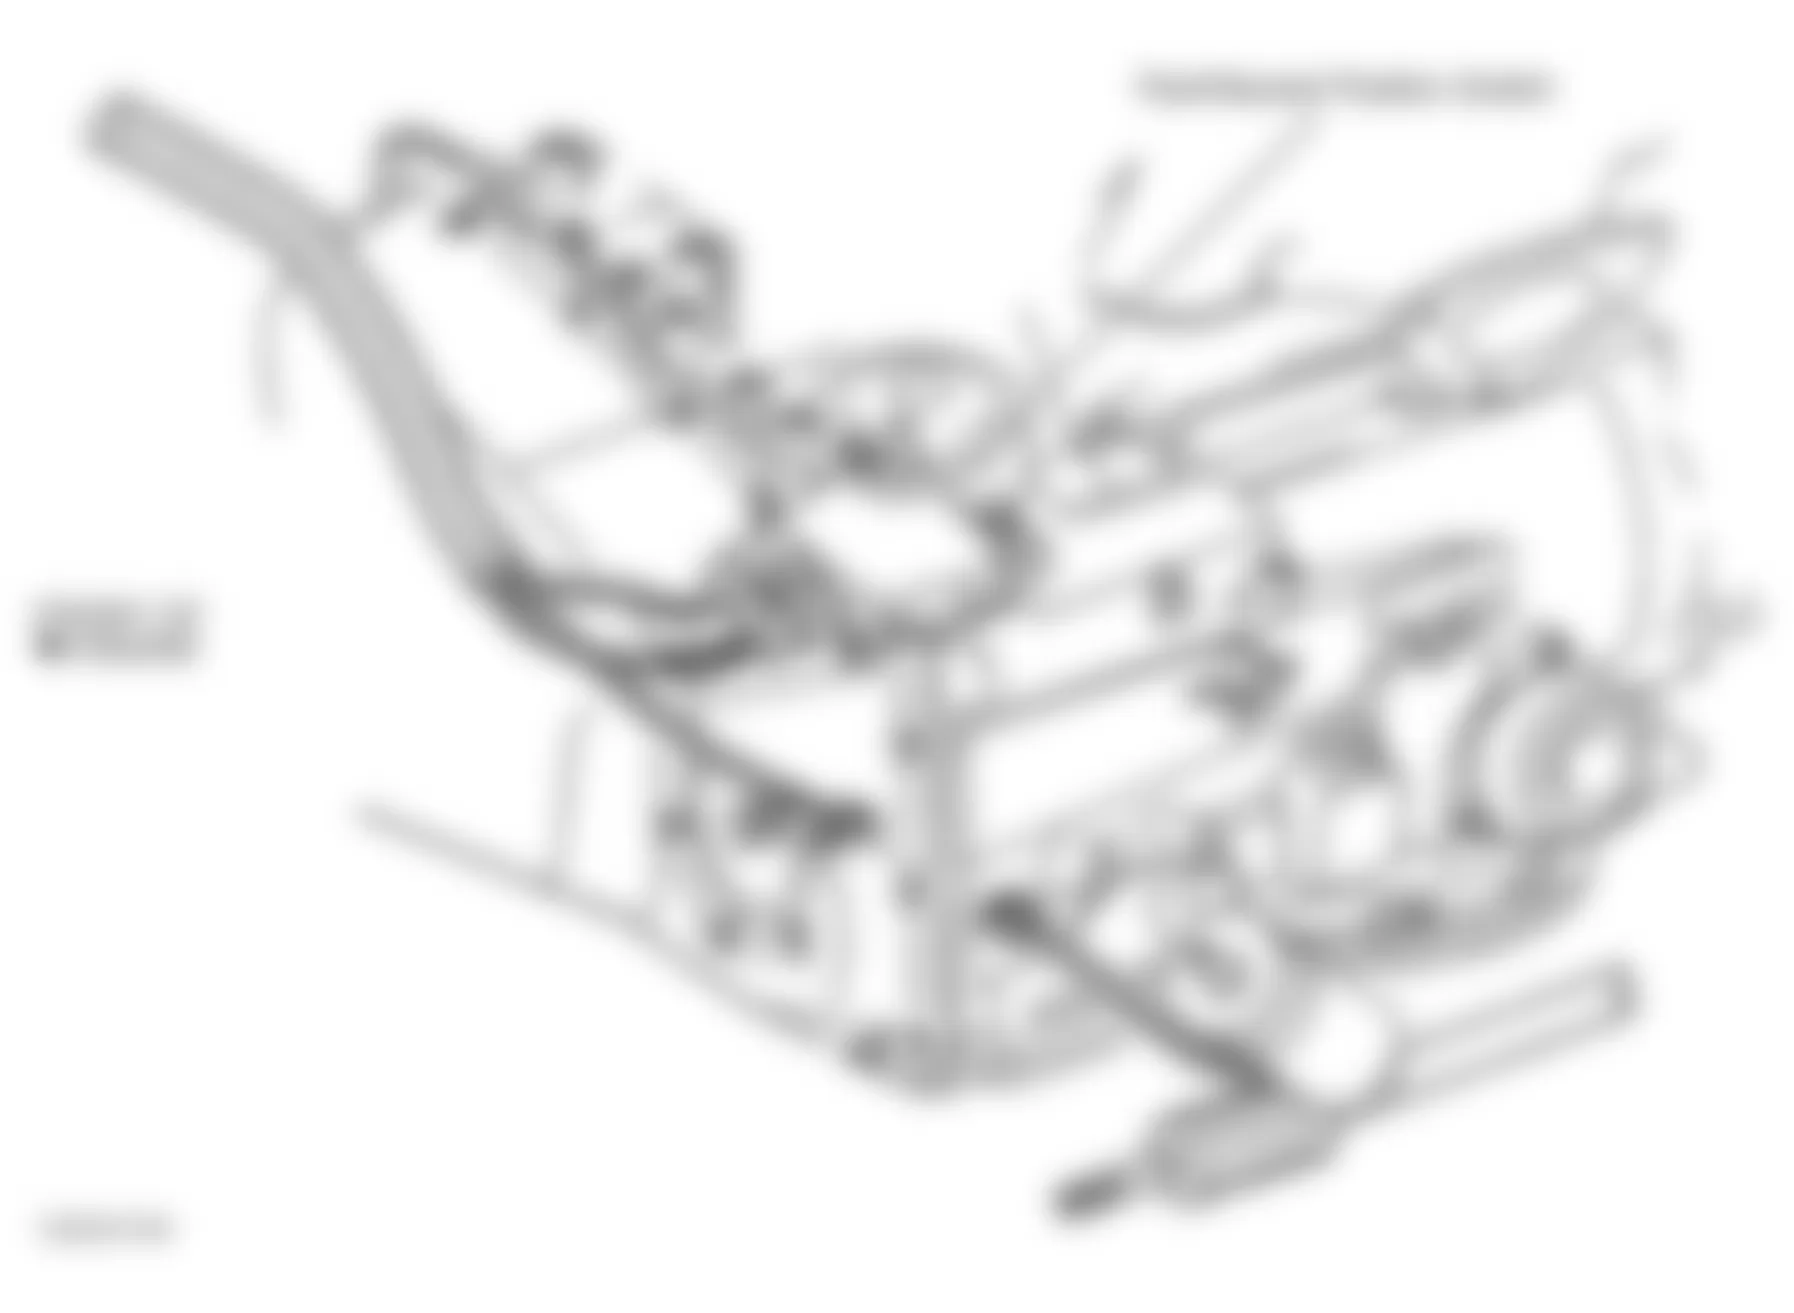 Buick Century Limited 2001 - Component Locations -  Right Rear Of Transaxle